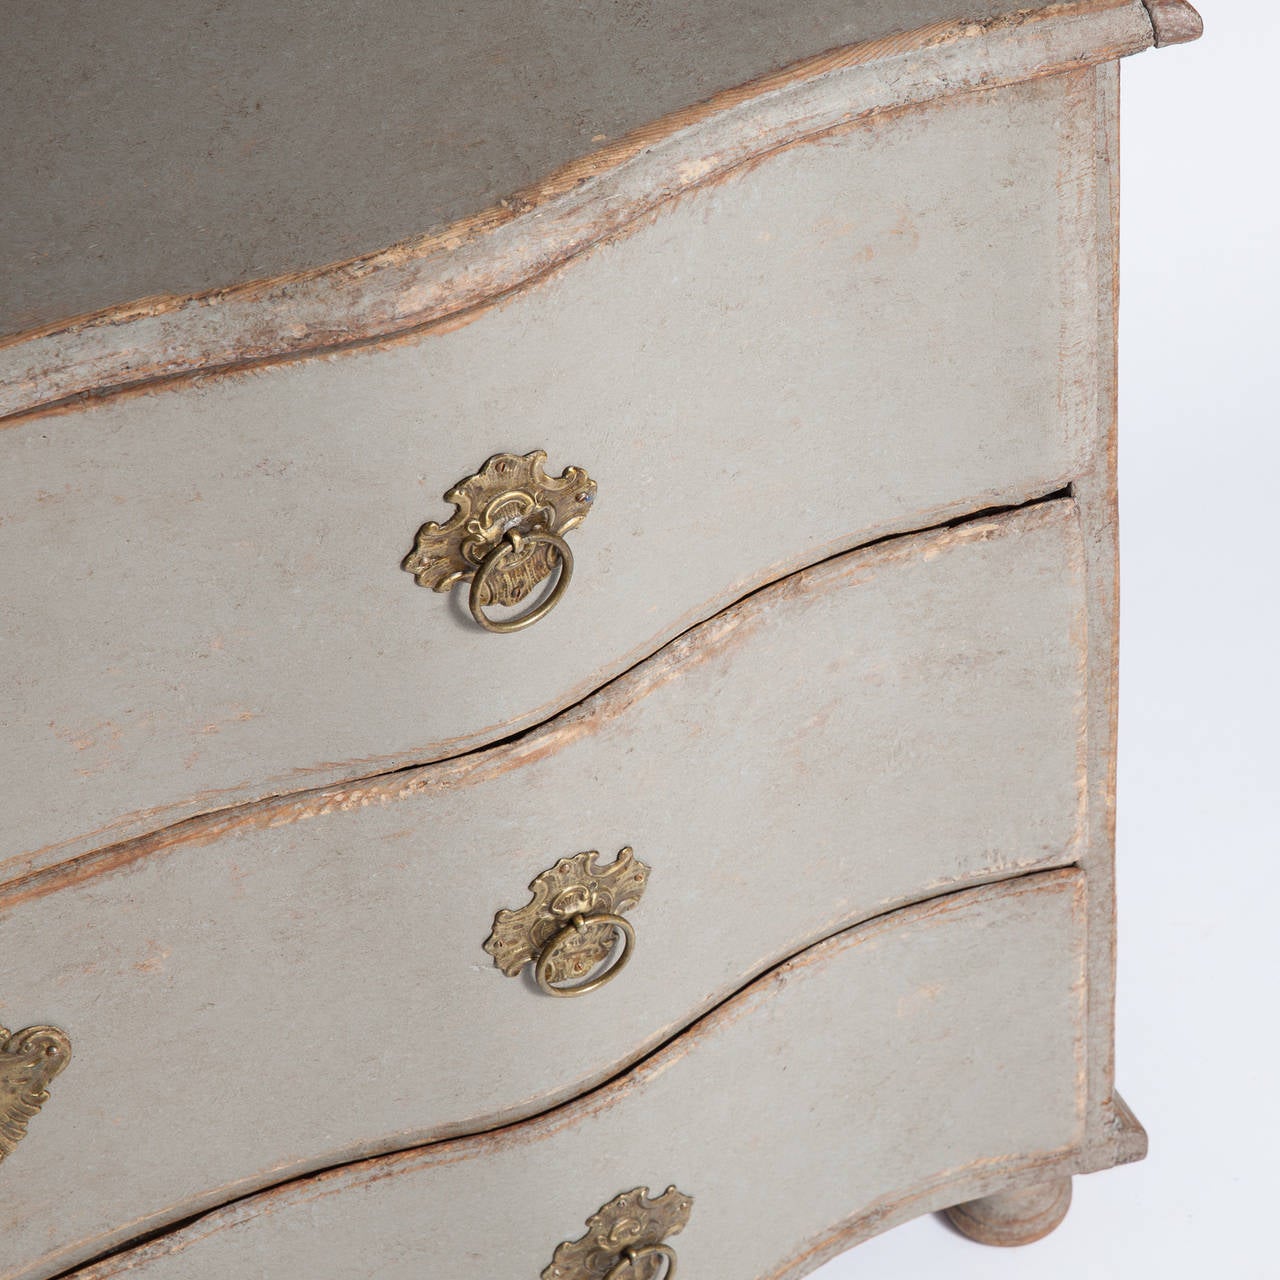 This lovely Swedish three-drawer serpentine chest from the Baroque period has a gently curved front ending in pad feet. It retains all of the original and very elegant hardware from the period. The top drawer is divided. It dates to 1760. The pale